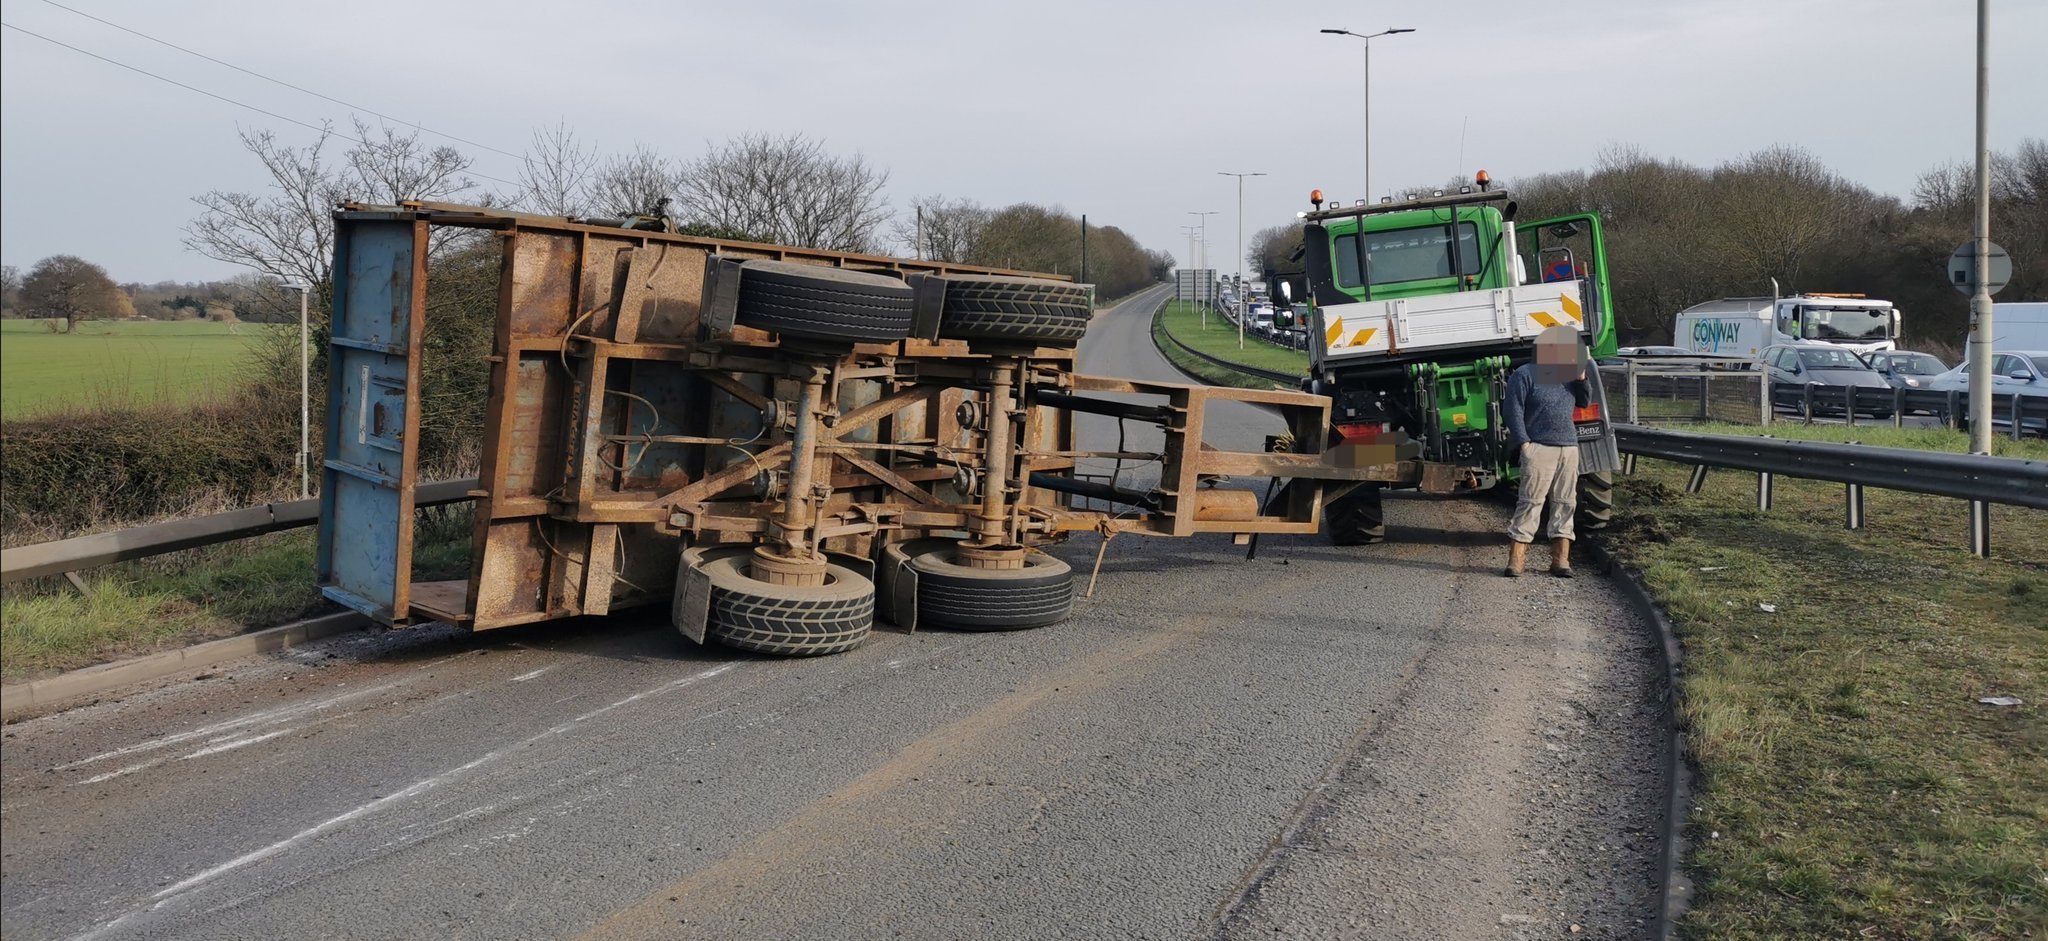 The vehicle blocked all access onto the A414. Credit: BCH Road Policing Unit